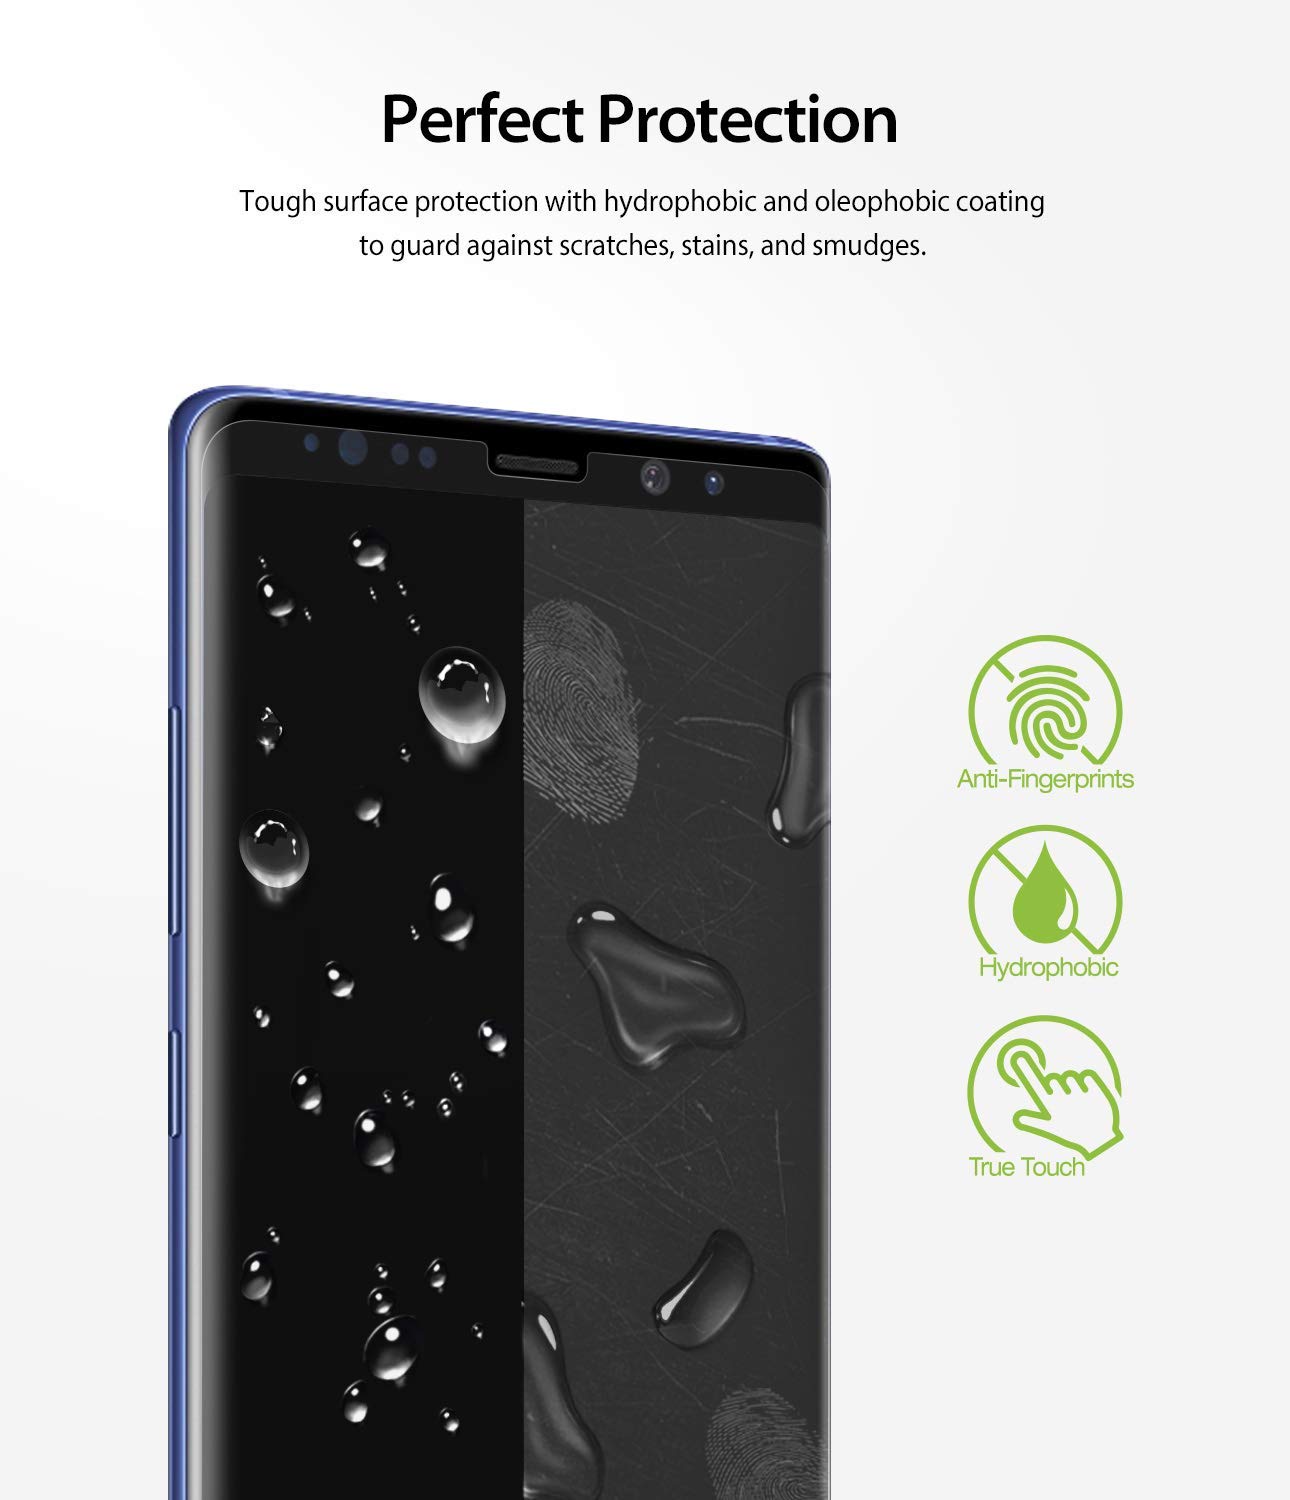 perfect protection tough surface protection with hydrophobic and oleophobic coating to guard against scratches, stains and smduges